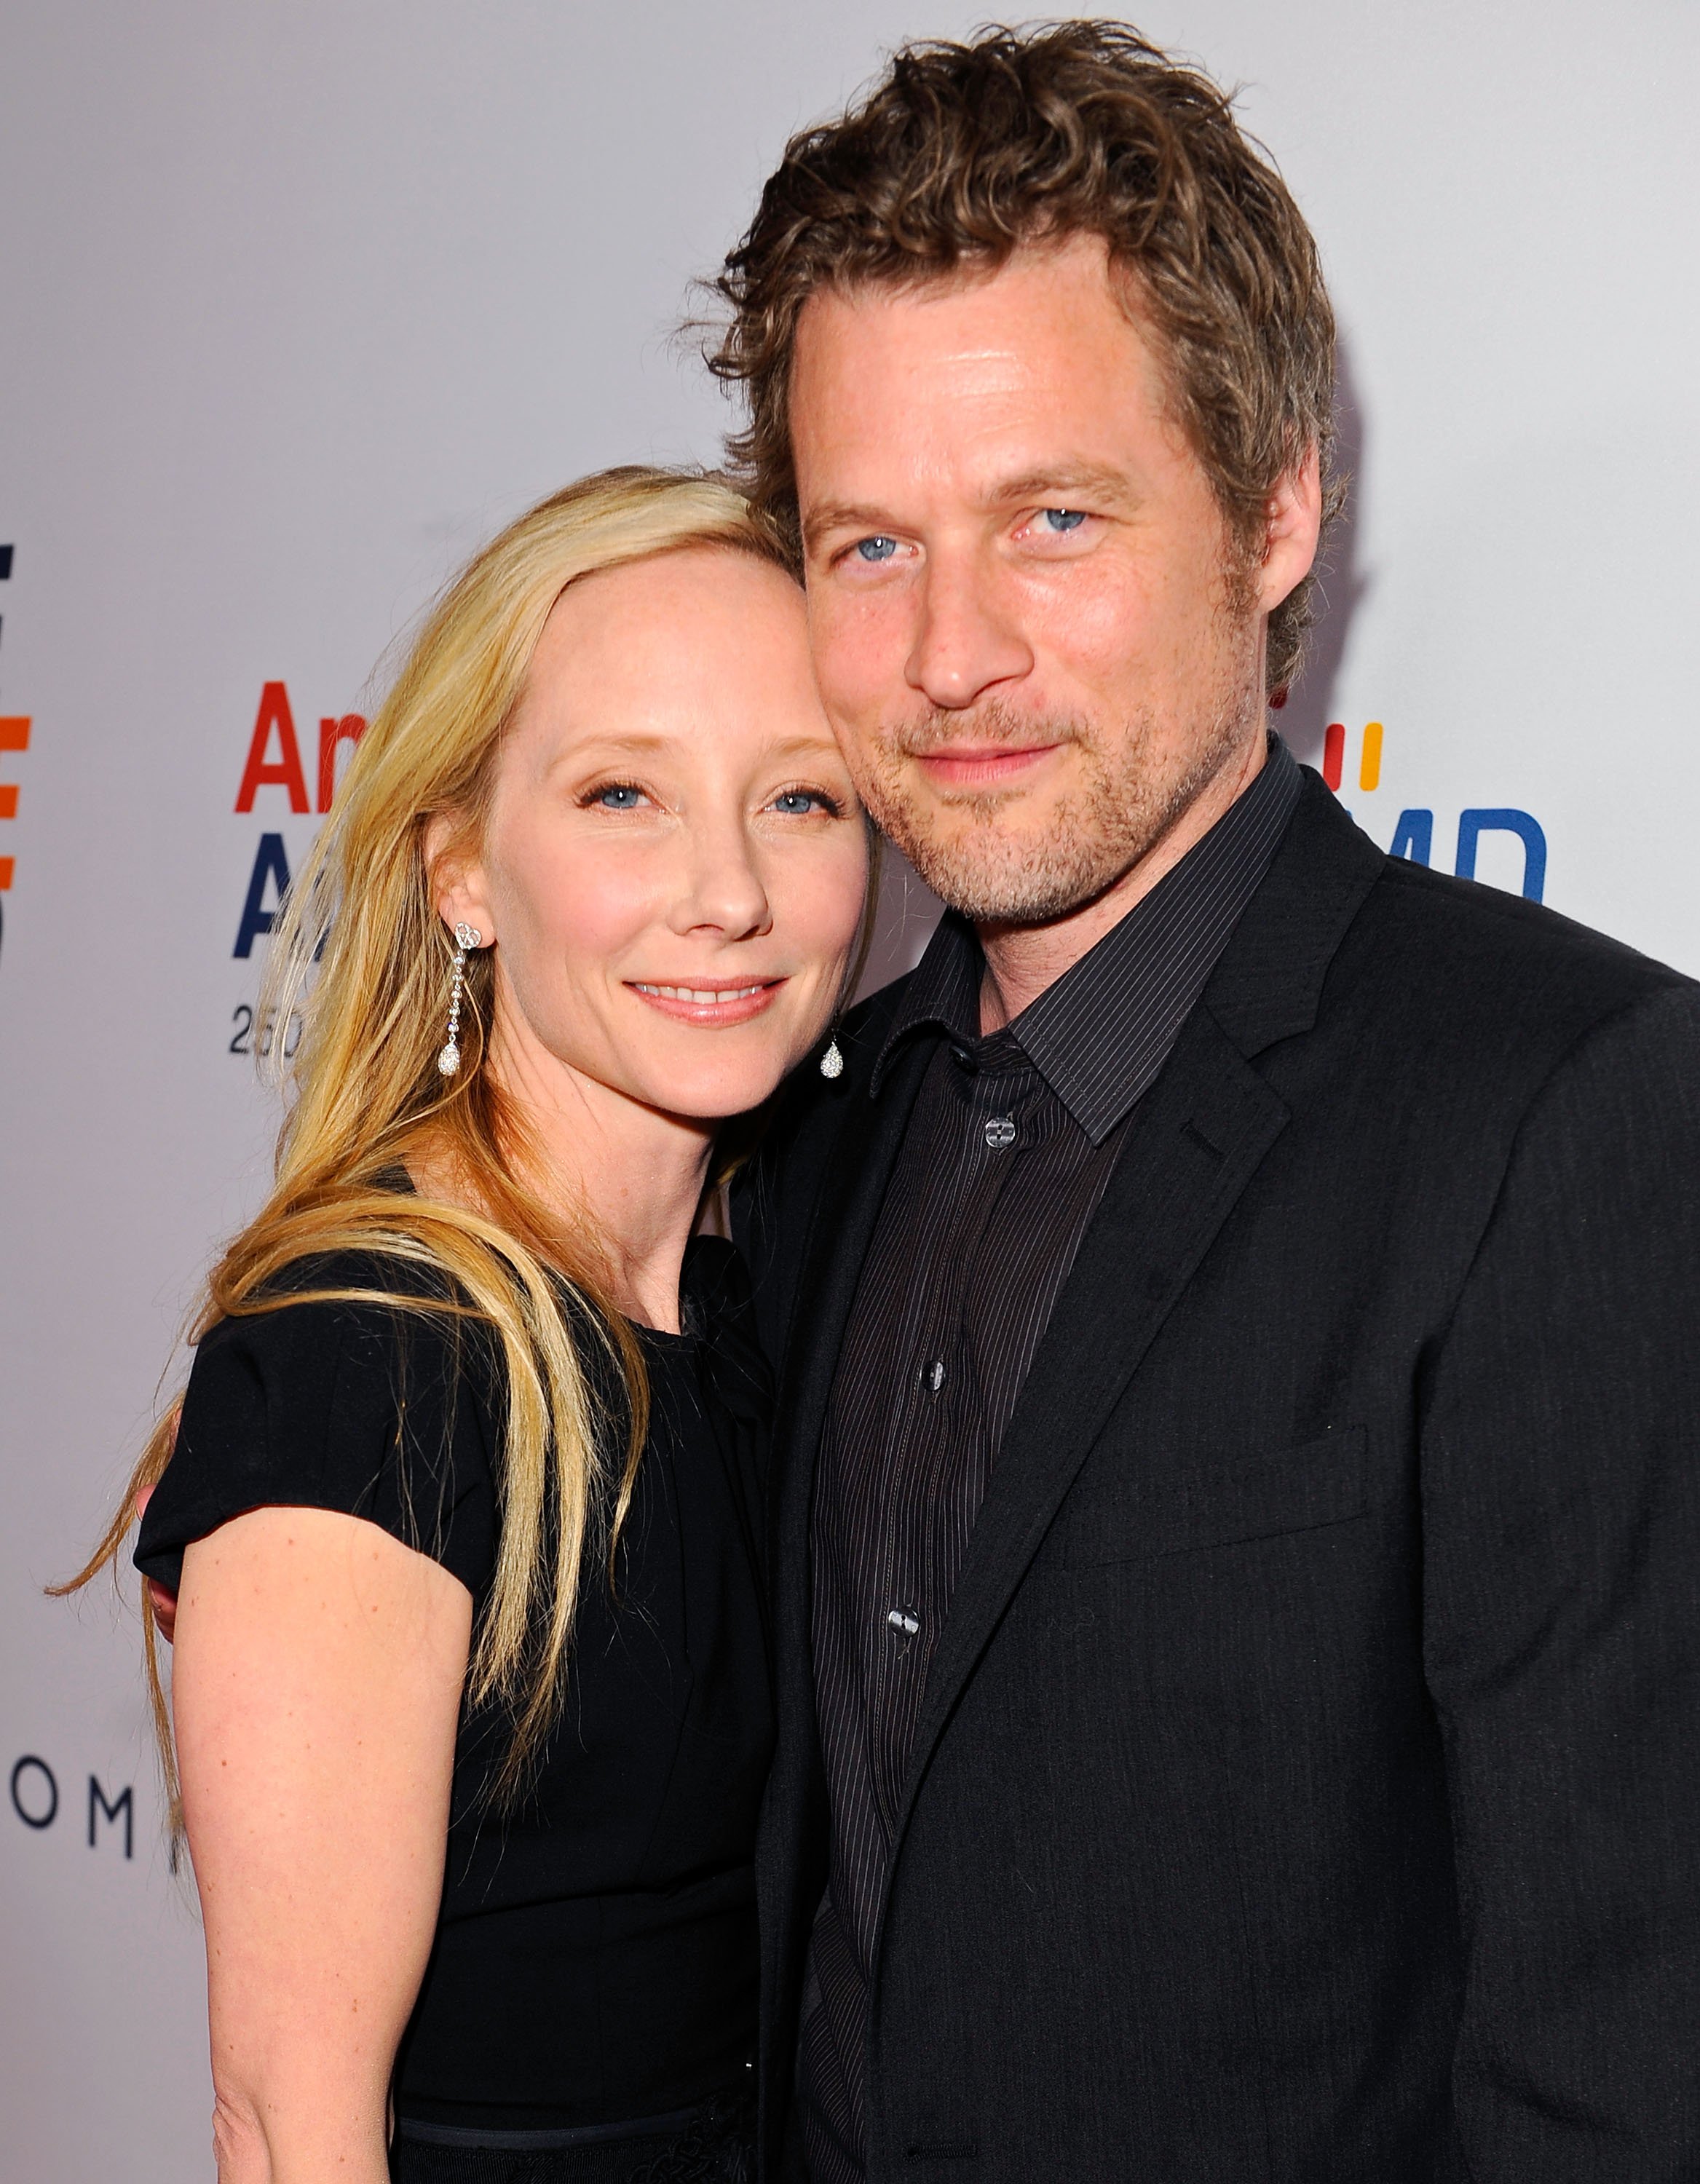 Actress Anne Heche and actor James Tupper attend the 17th Annual Race to Erase MS event co-chaired by Nancy Davis and Tommy Hilfiger at the Hyatt Regency Century Plaza on May 7, 2010 in Los Angeles, California. | Source: Getty Images